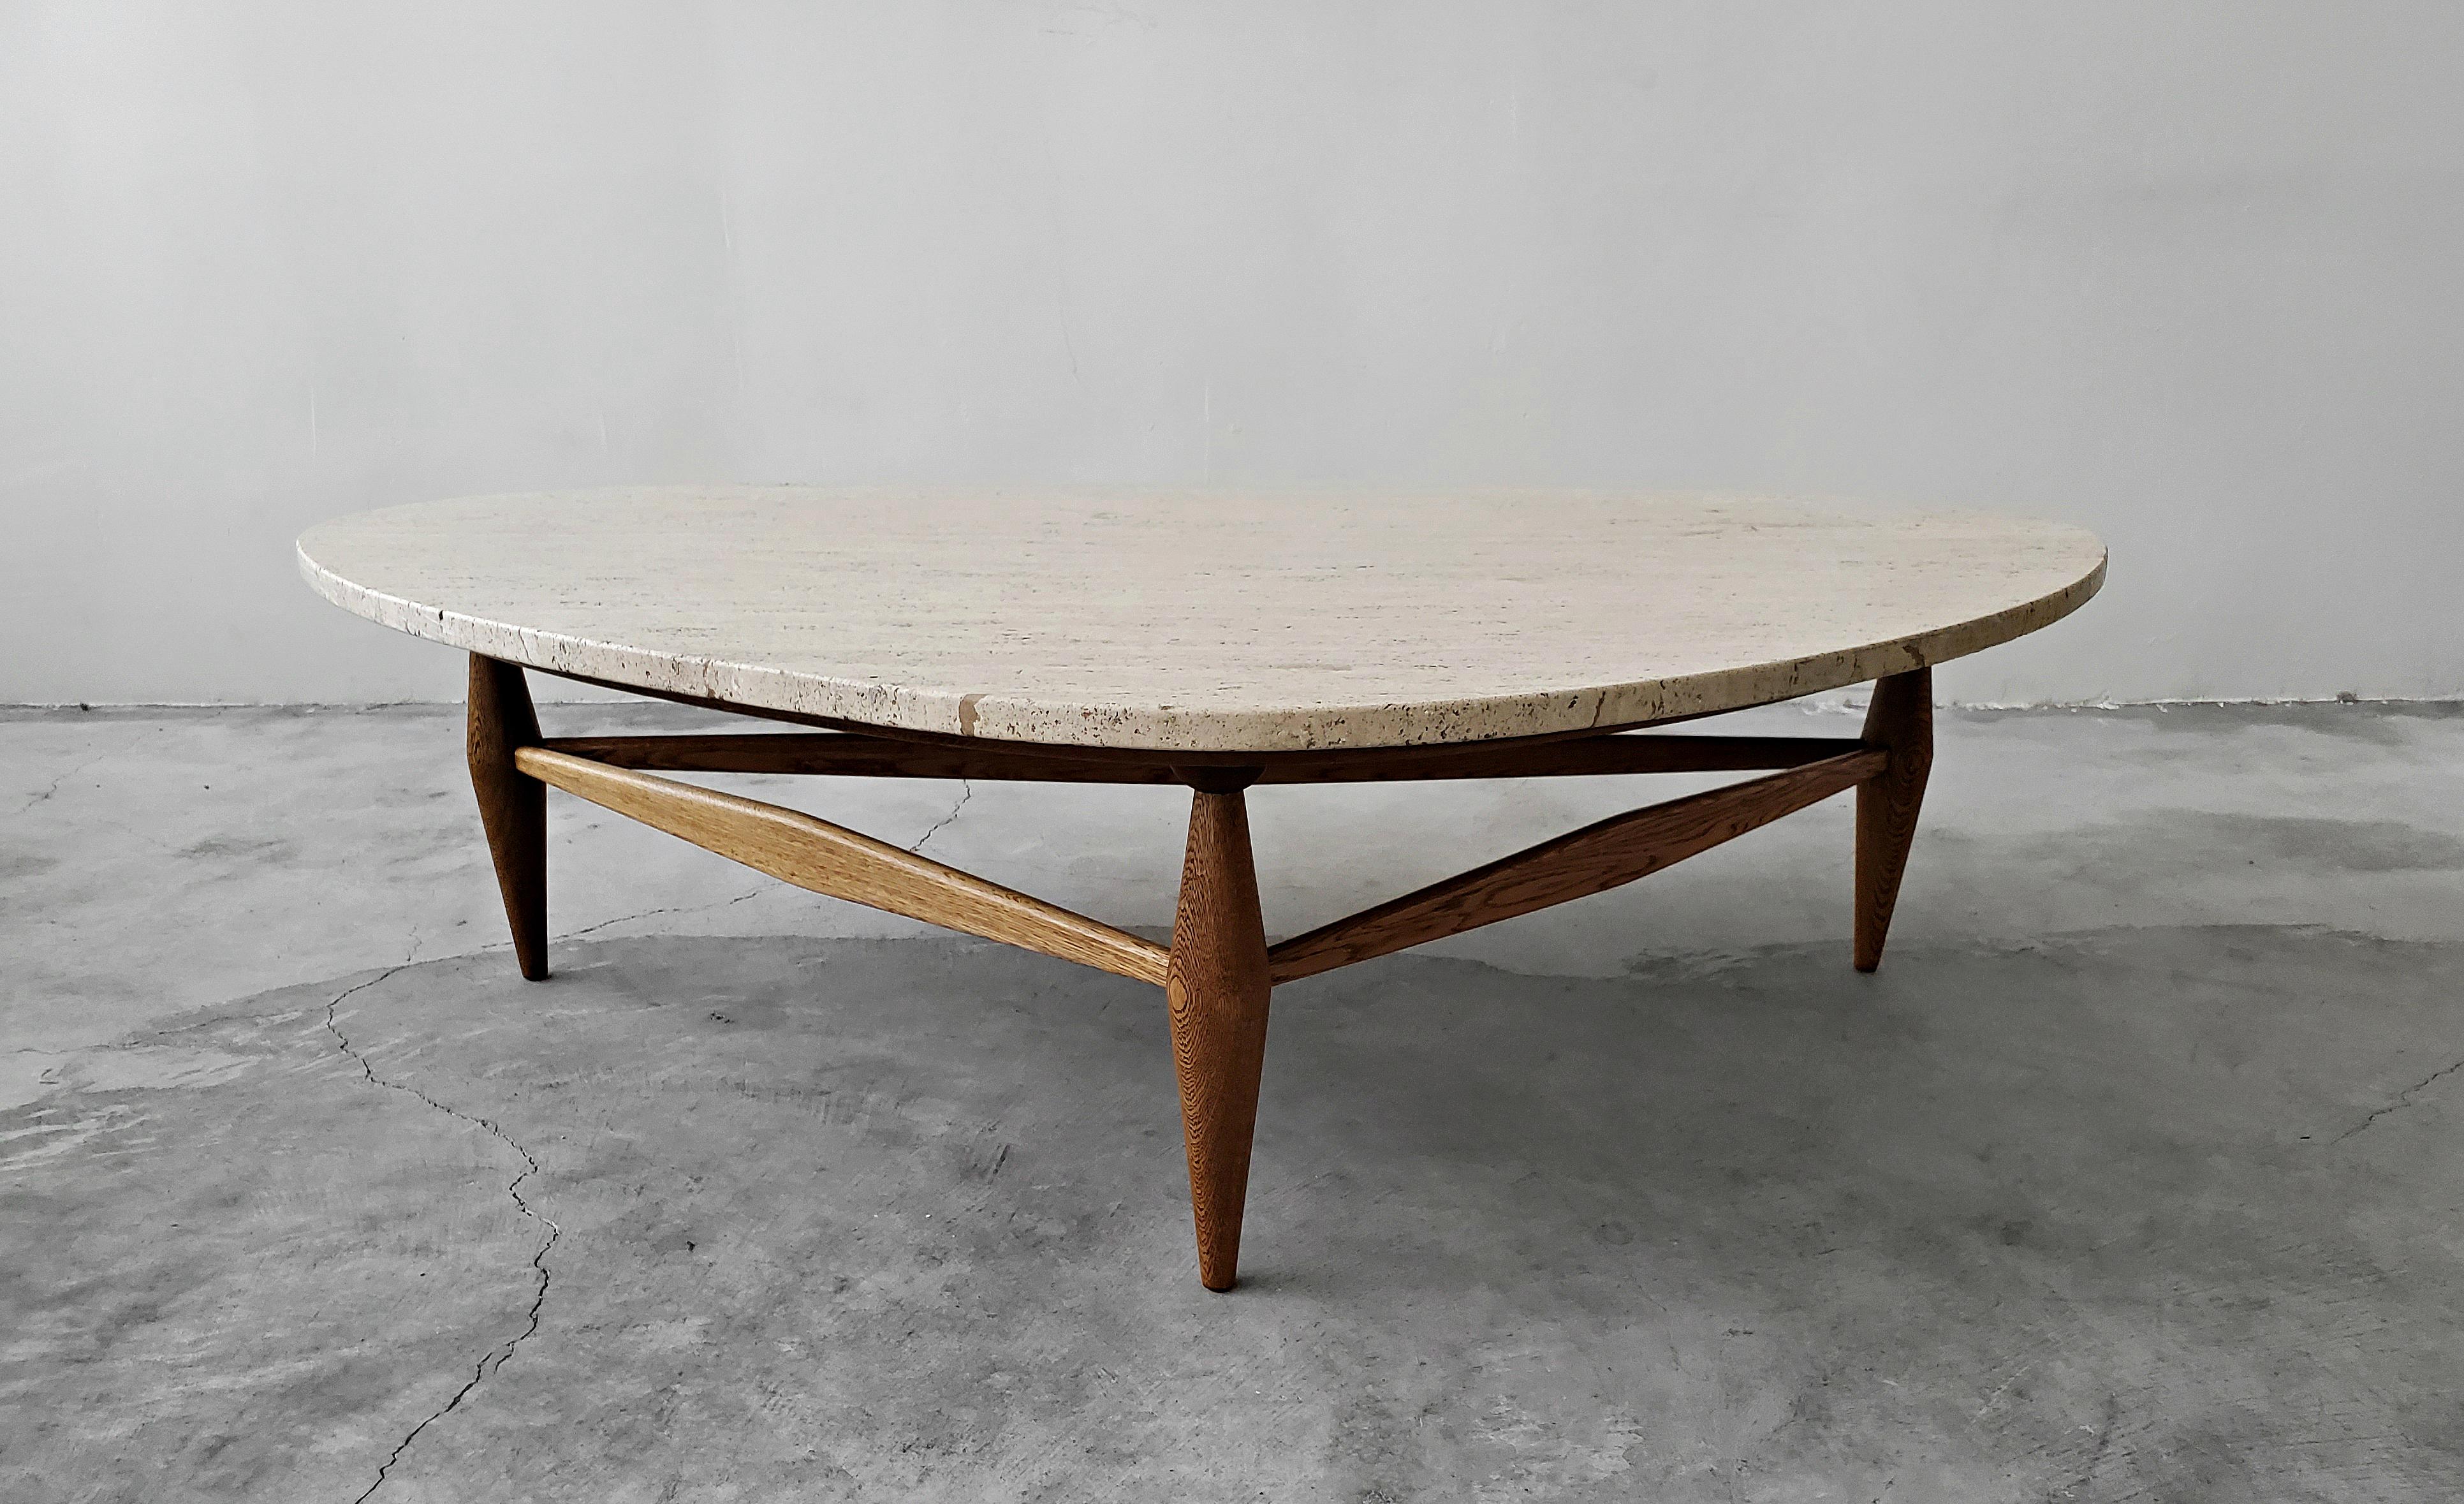 A rare and beautiful combination of travertine and oak. This stunning midcentury coffee table is constructed of a triangular travertine top set on an expertly crafted, sculptural oak base. The base has a large plywood surface that supports the